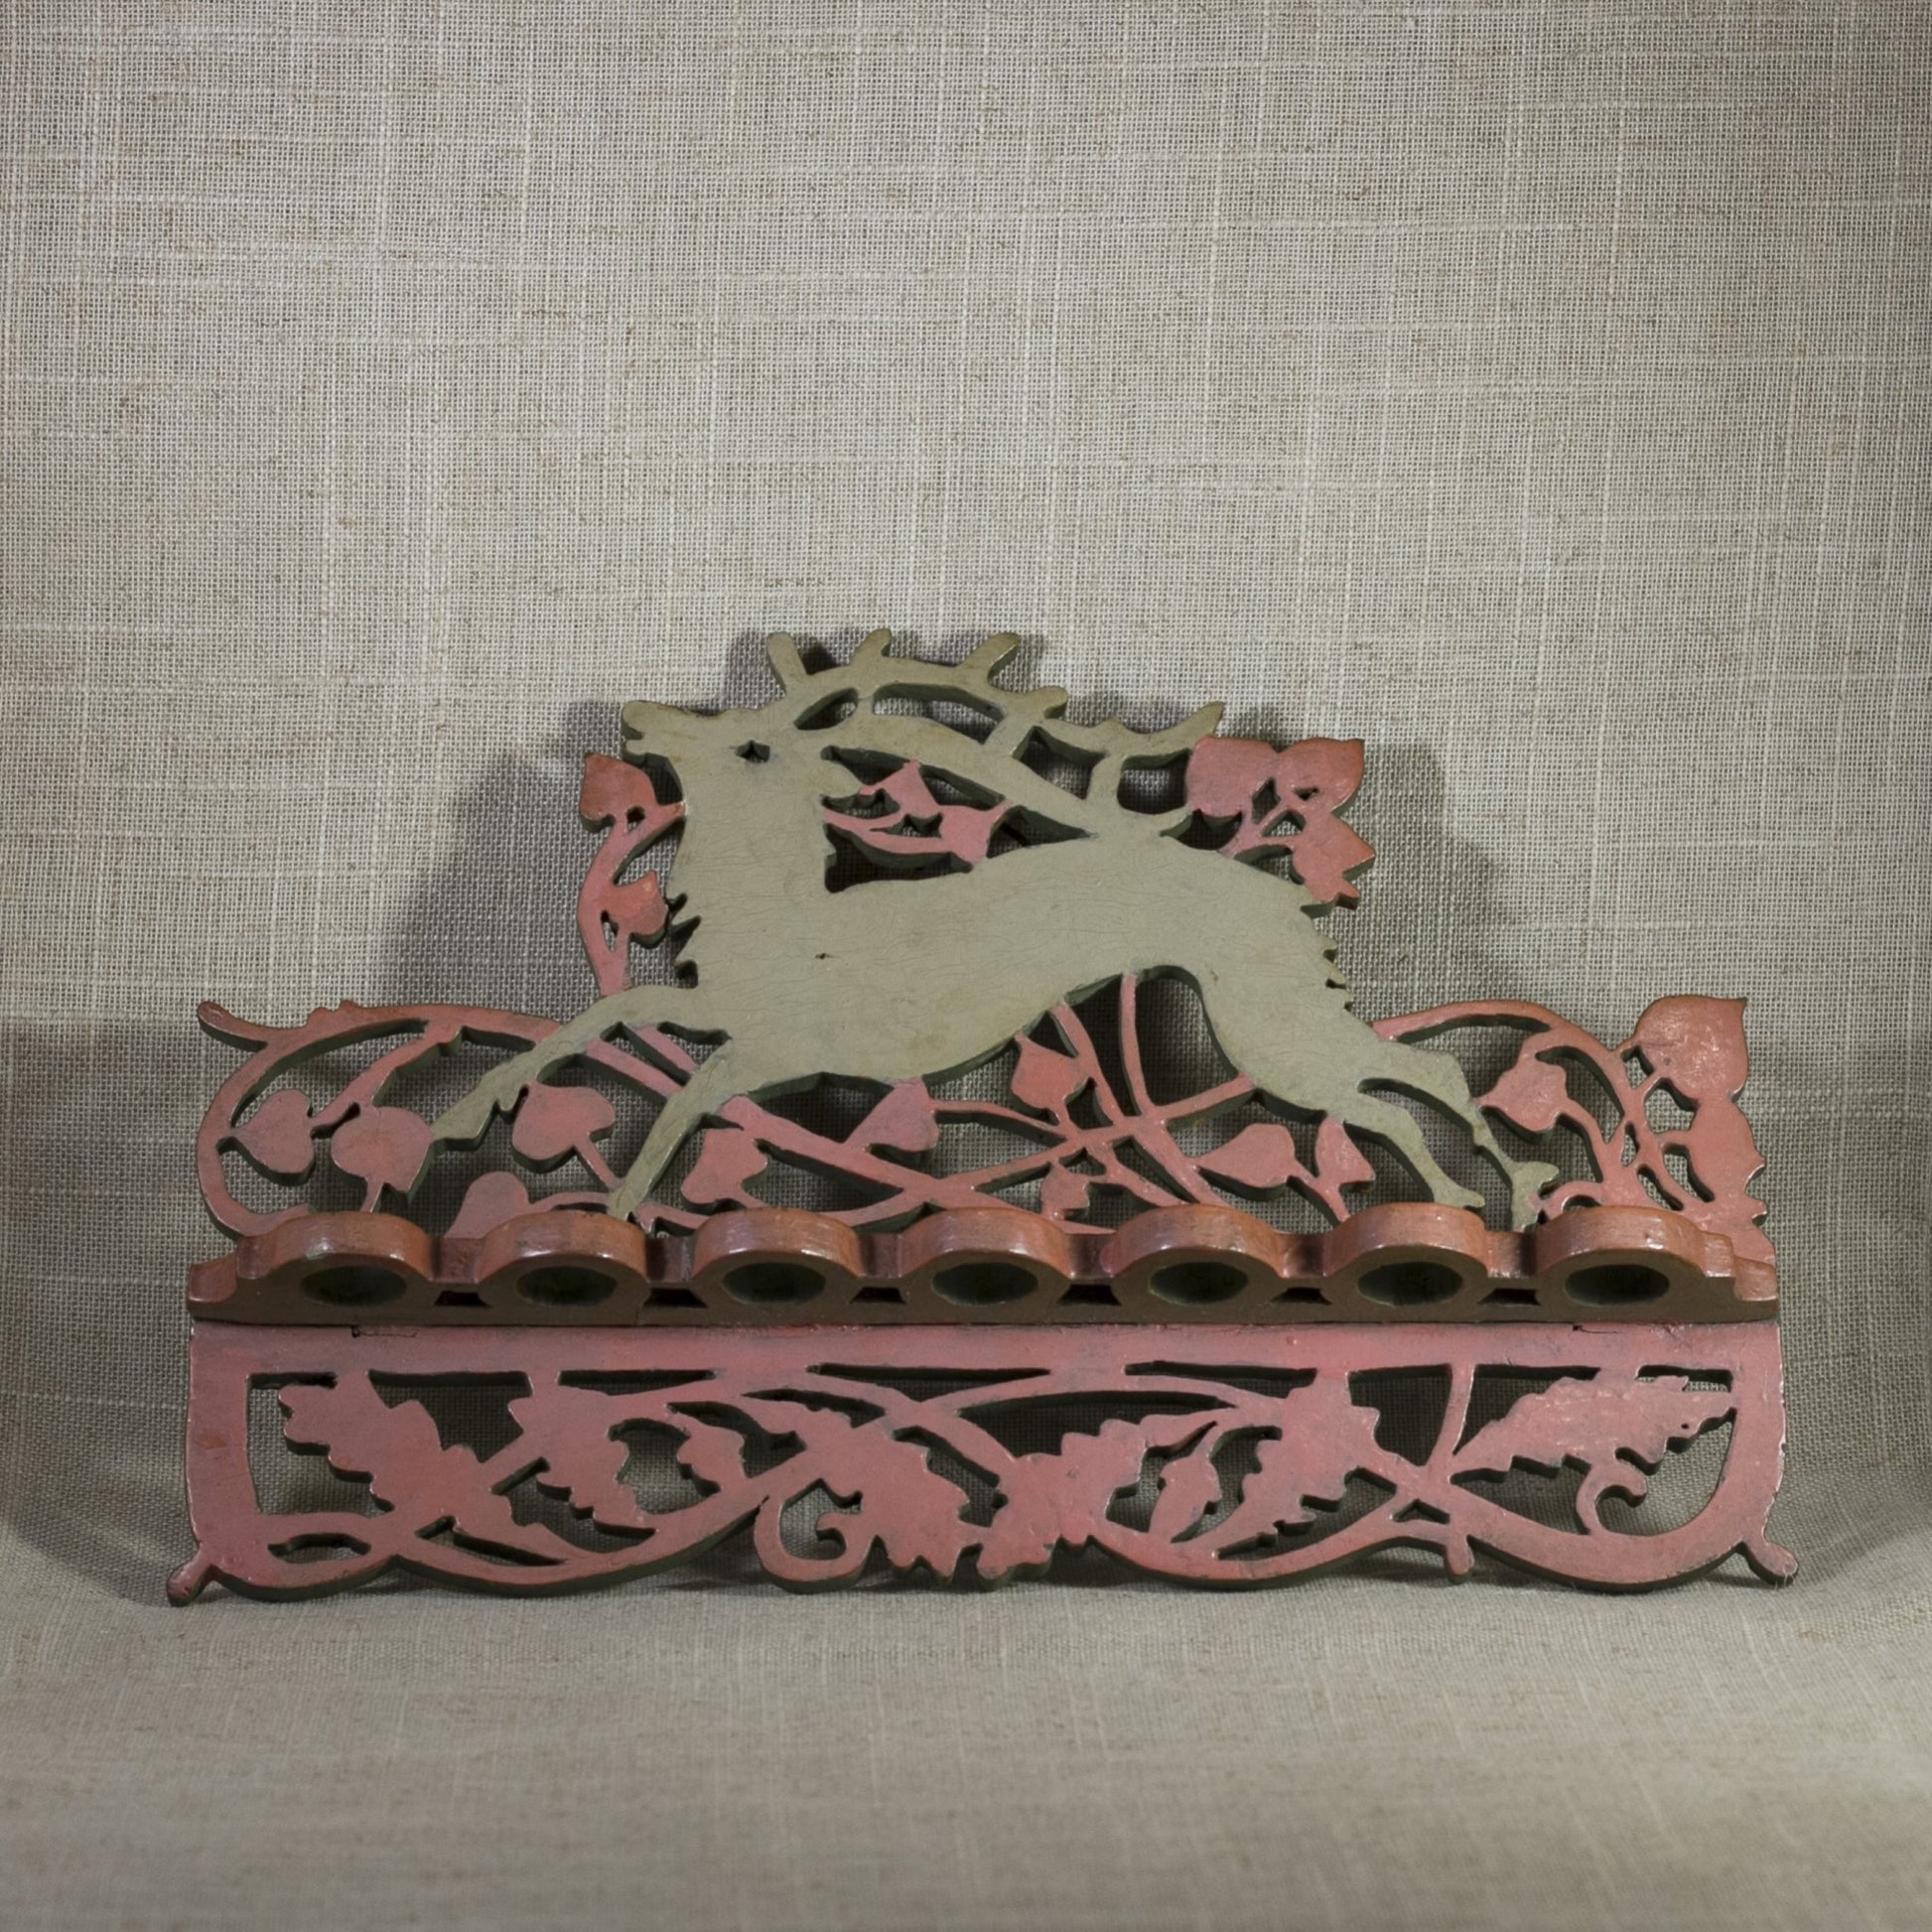 FOLK ART SPOON RACK Scroll and Fretwork Design with Stag